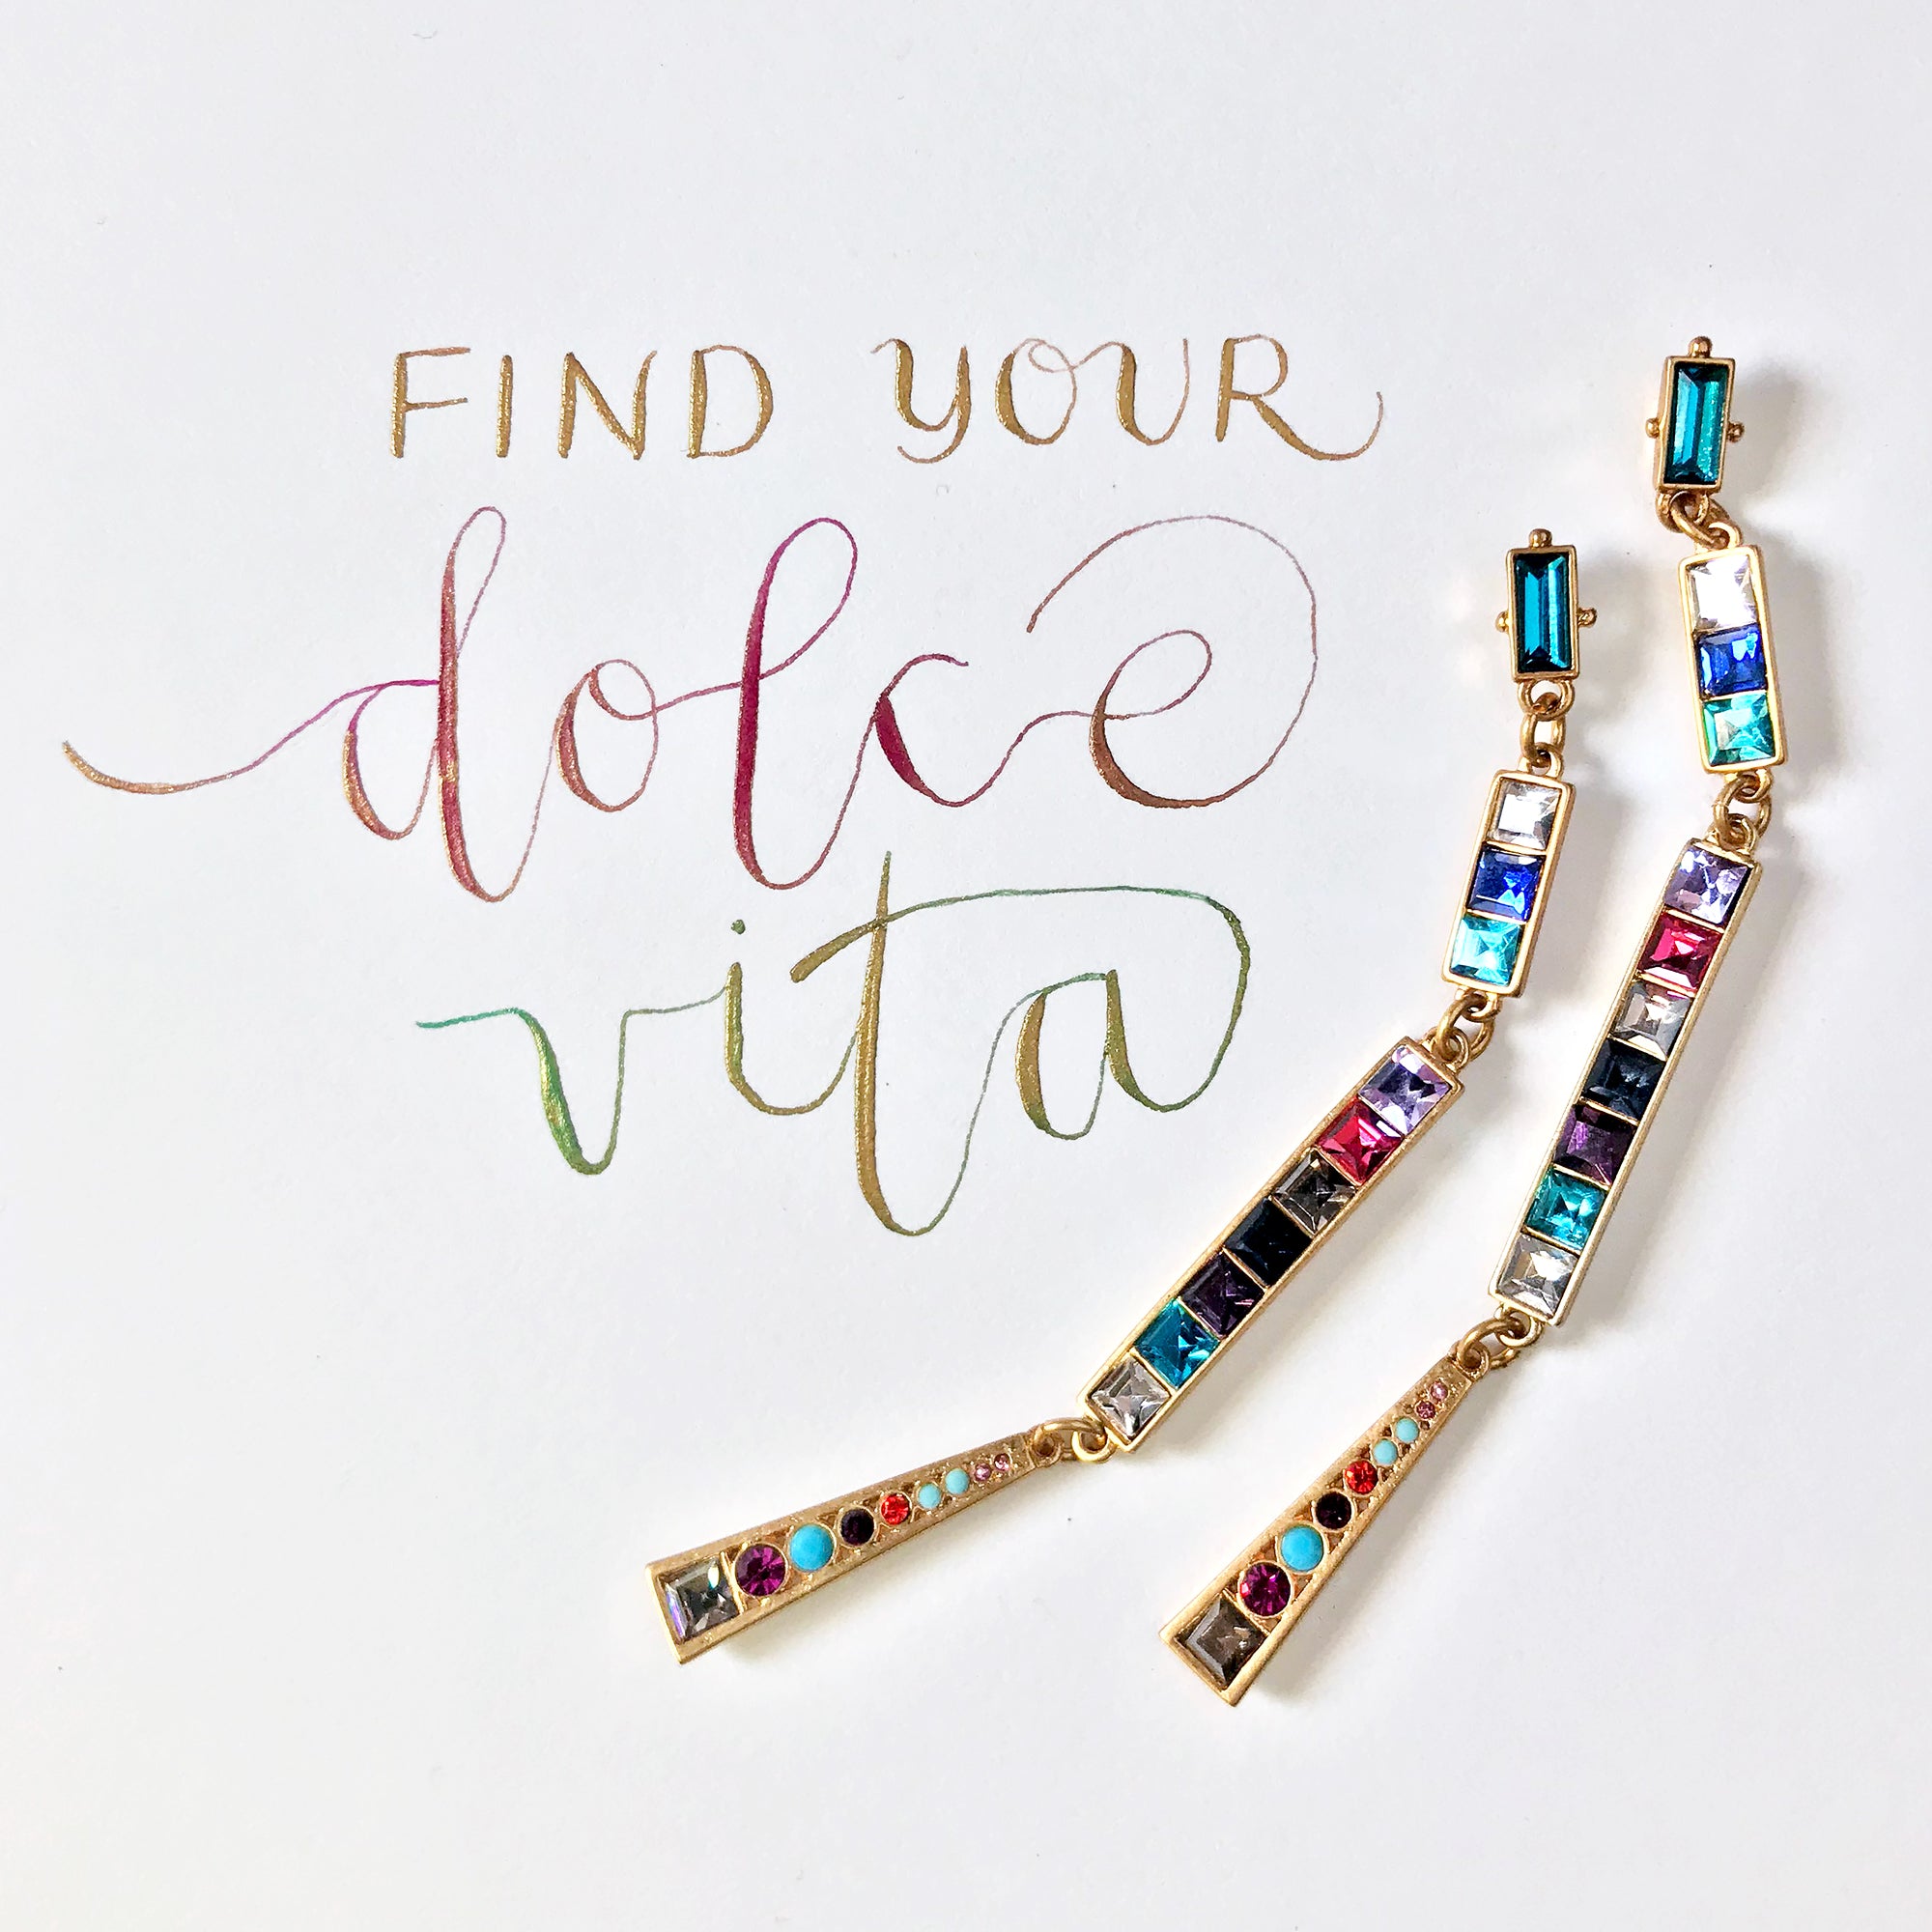 #SequinSayings - Find Your Dolce Vita